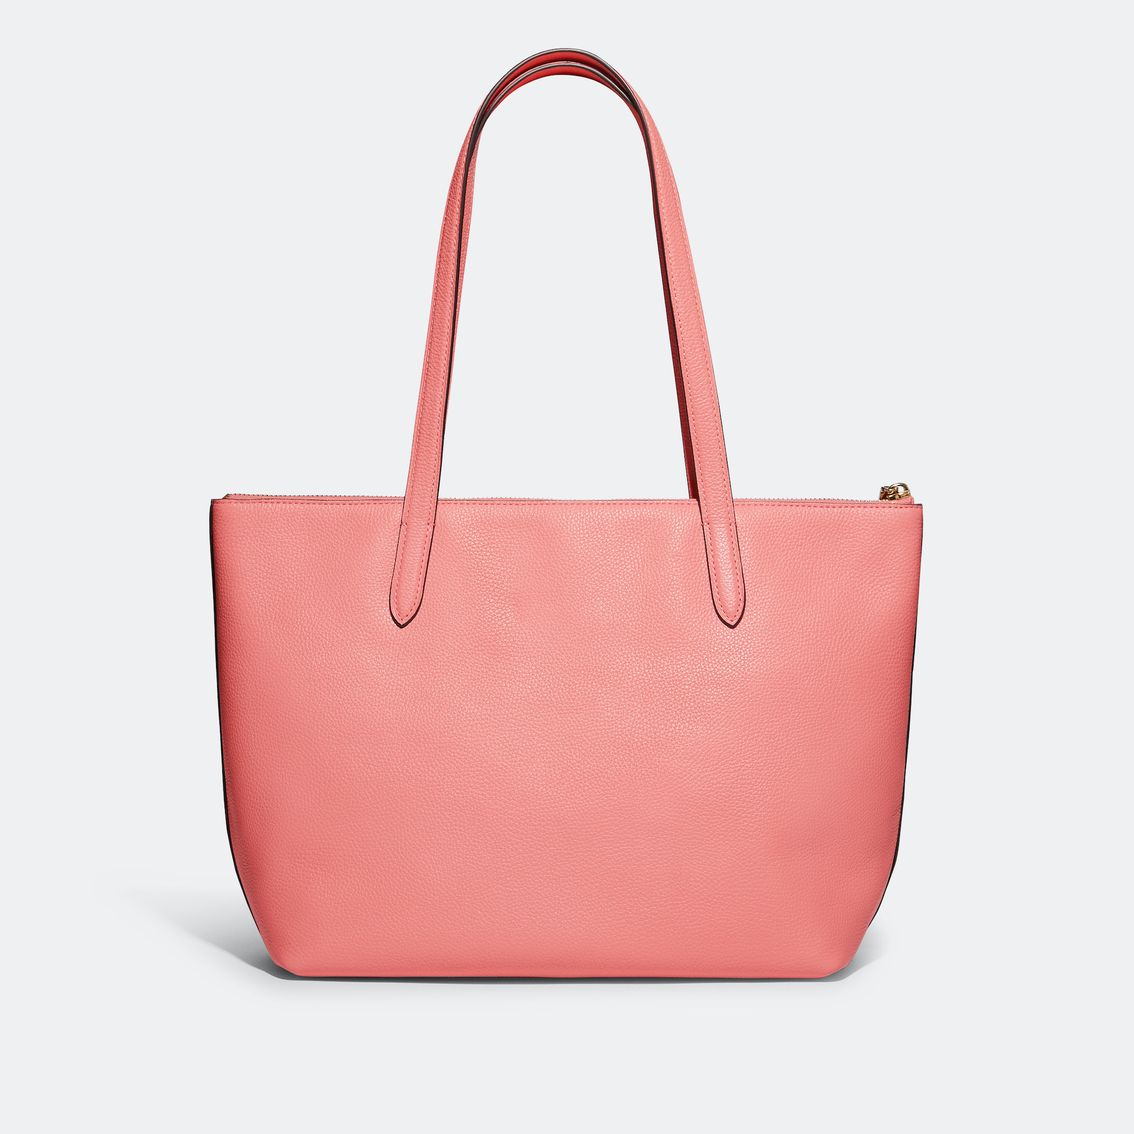 COACH Taylor Tote in Pebble Leather - Image 2 of 6